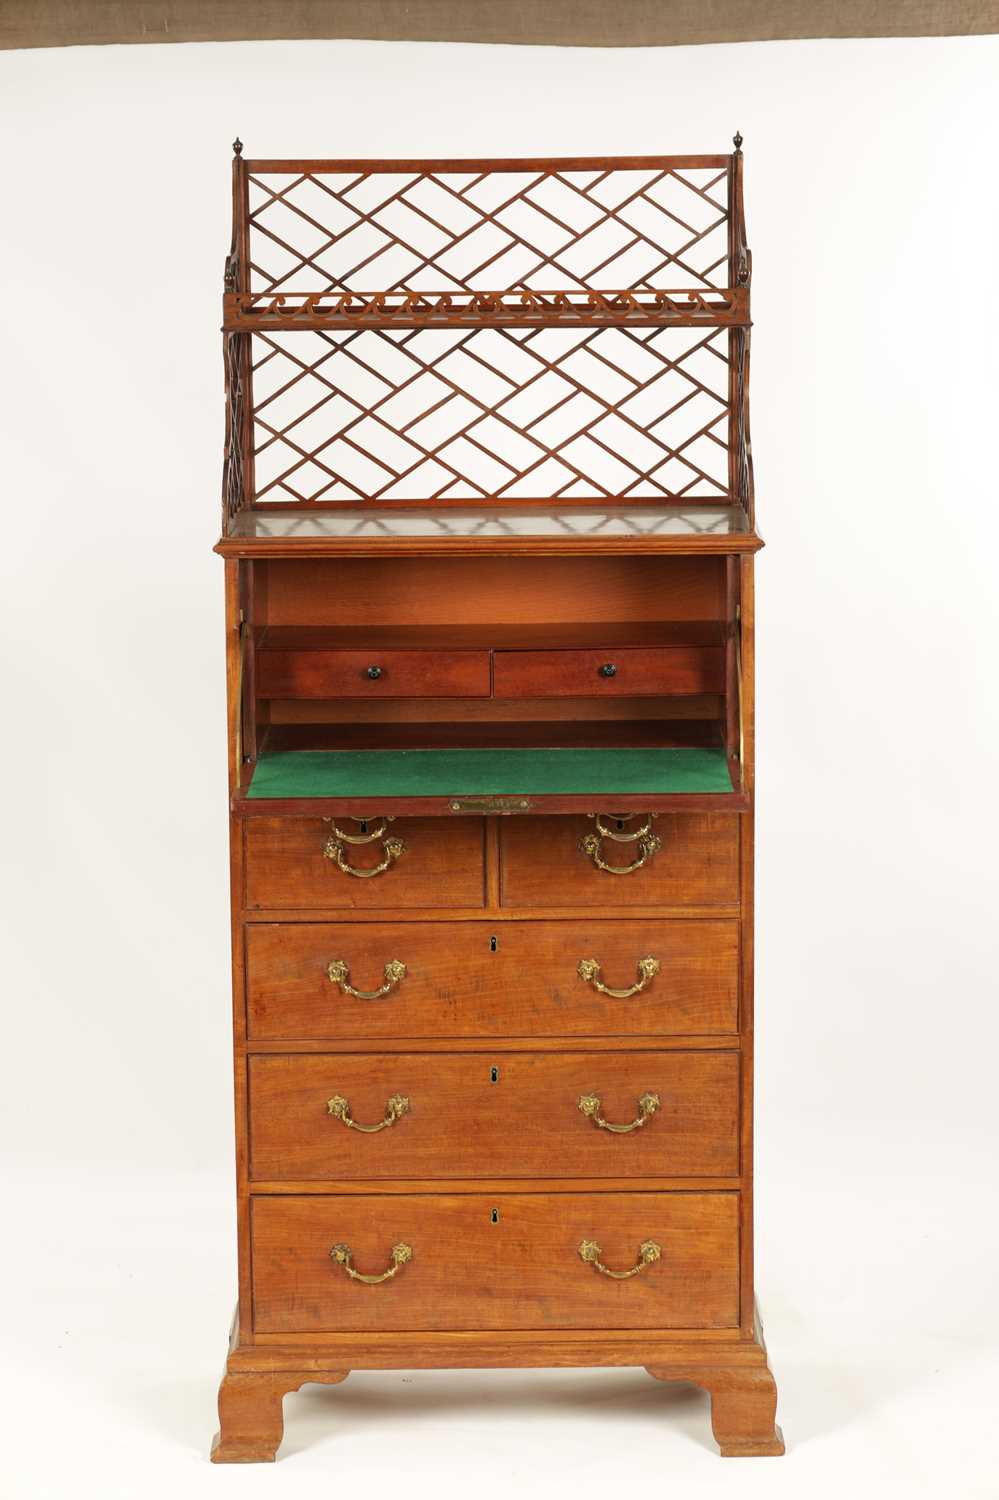 A RARE GEORGE III MAHOGANY LIBRARY SECRETAIRE CHEST OF DRAWERS WITH DETACHABLE BOOK CARRIER - Image 3 of 16